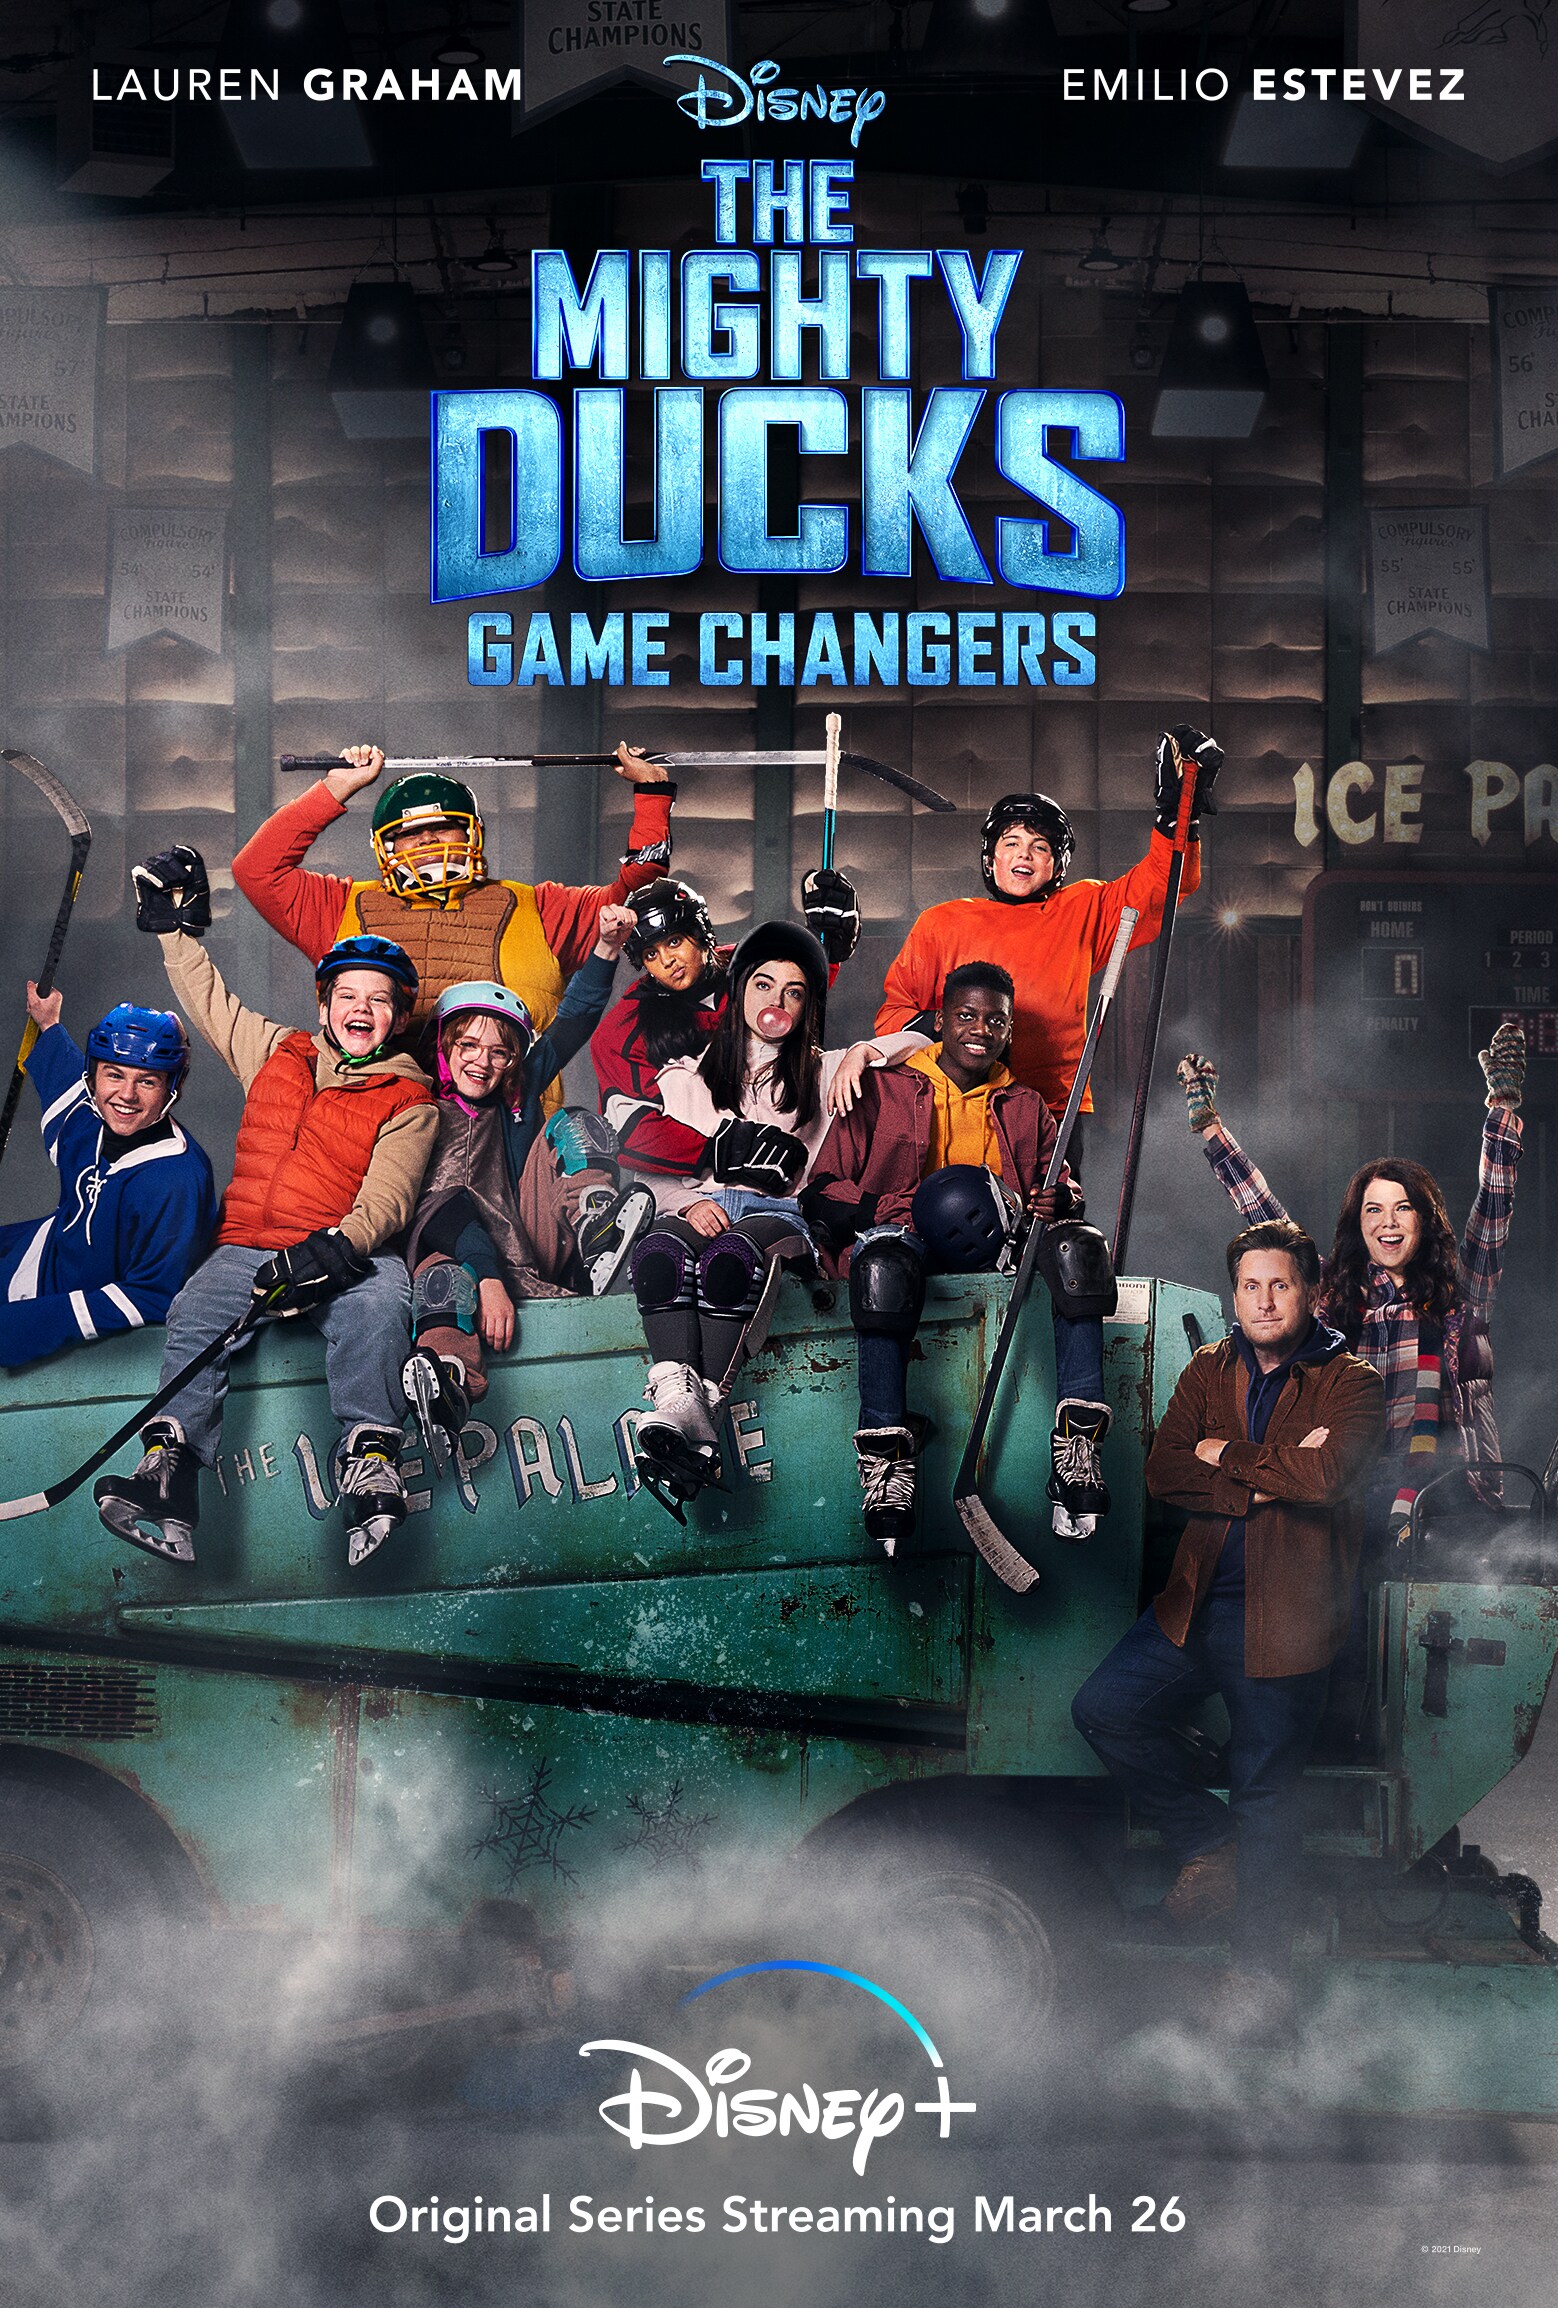 Evan & Sofi - Best Bits / Highlights from Season One of The Mighty Ducks  Game Changers - Disney 